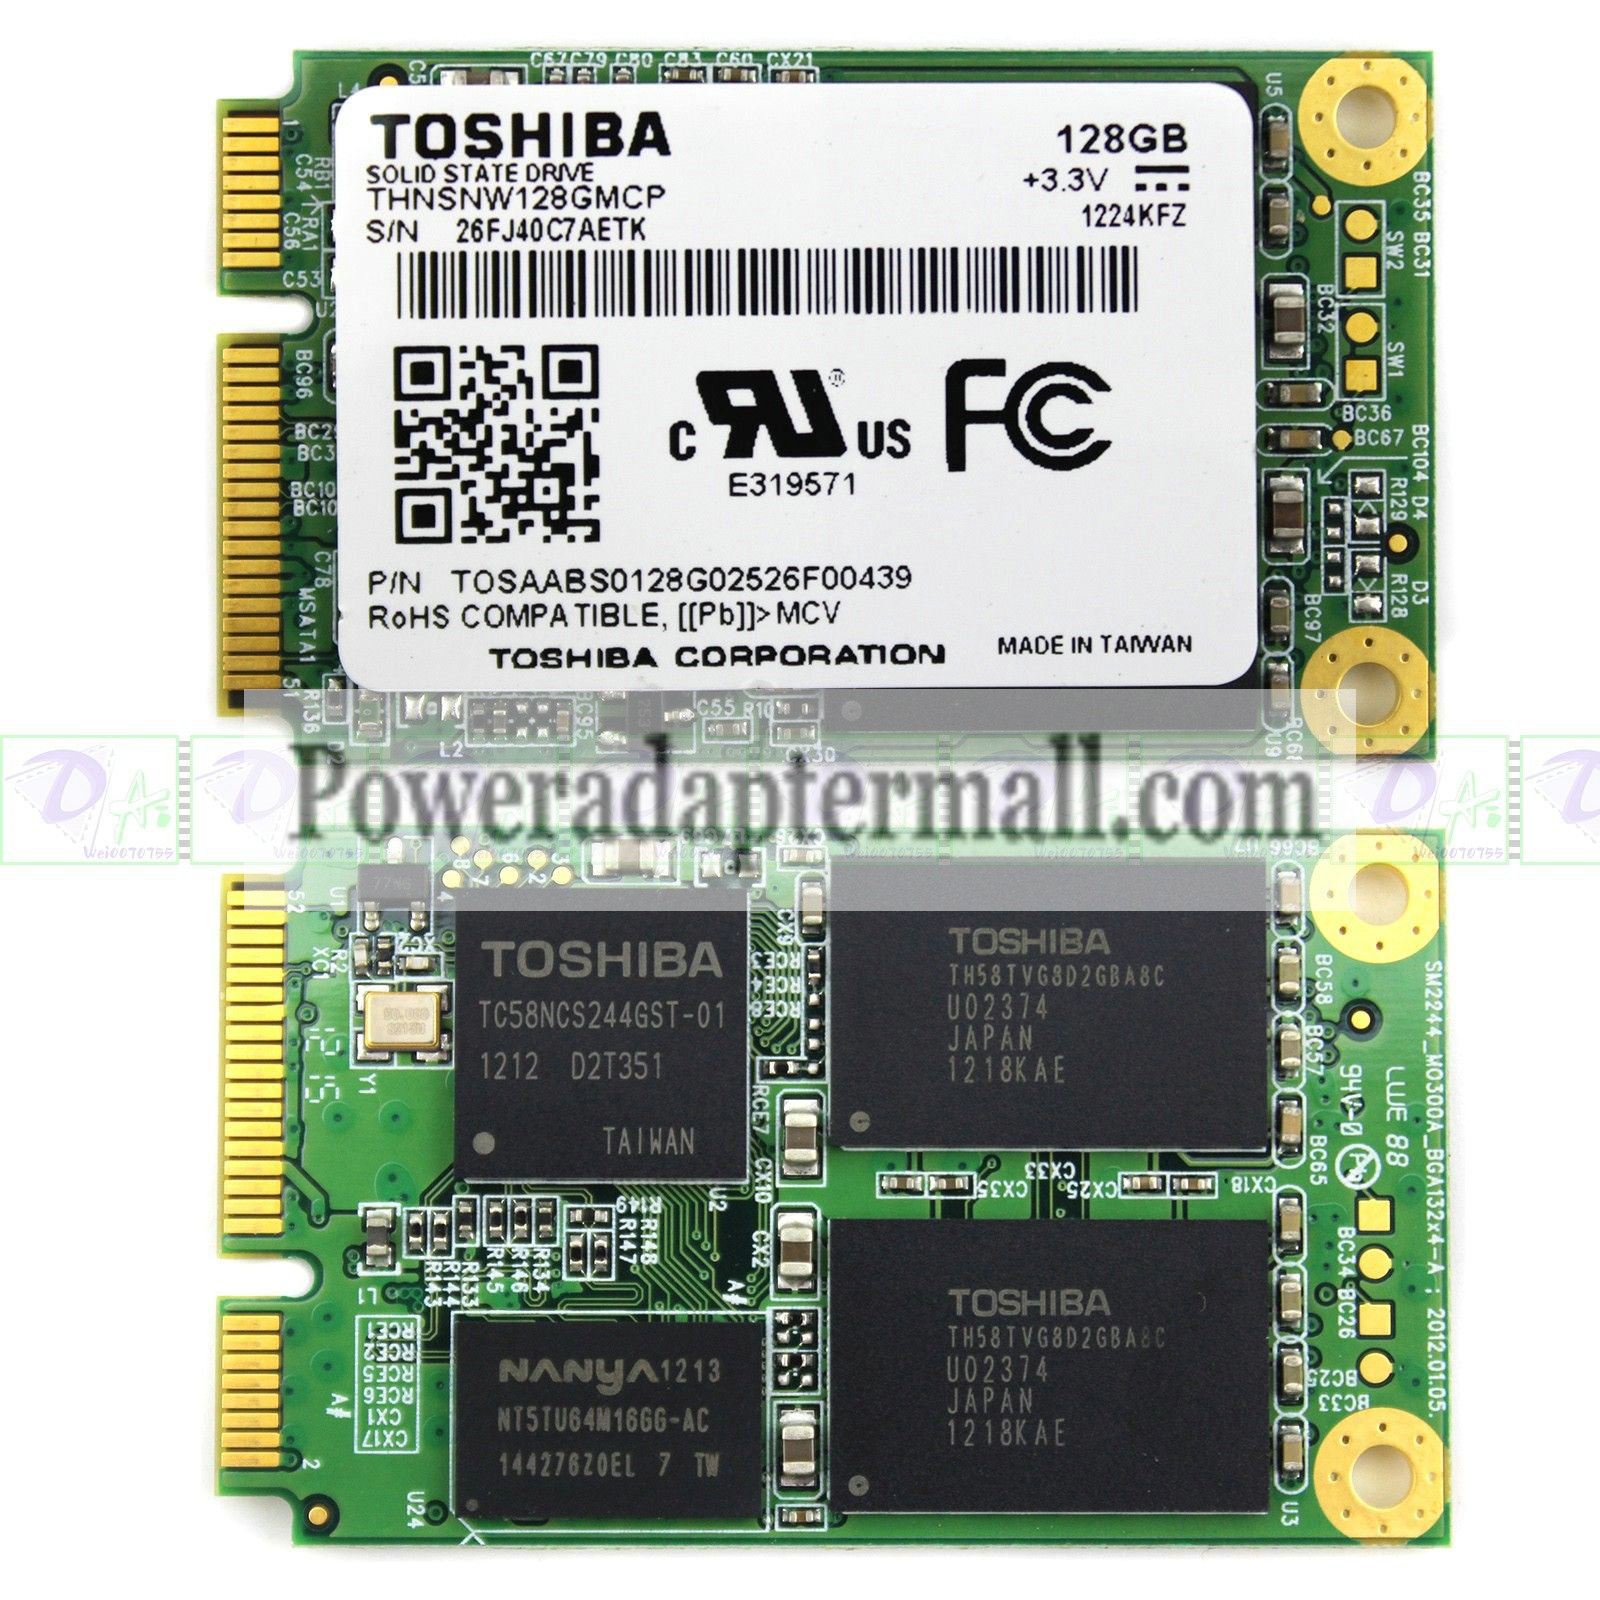 TOSHIBA THNSNW128GMCP 128GB SSD Solid State Drive MSATA for Acer